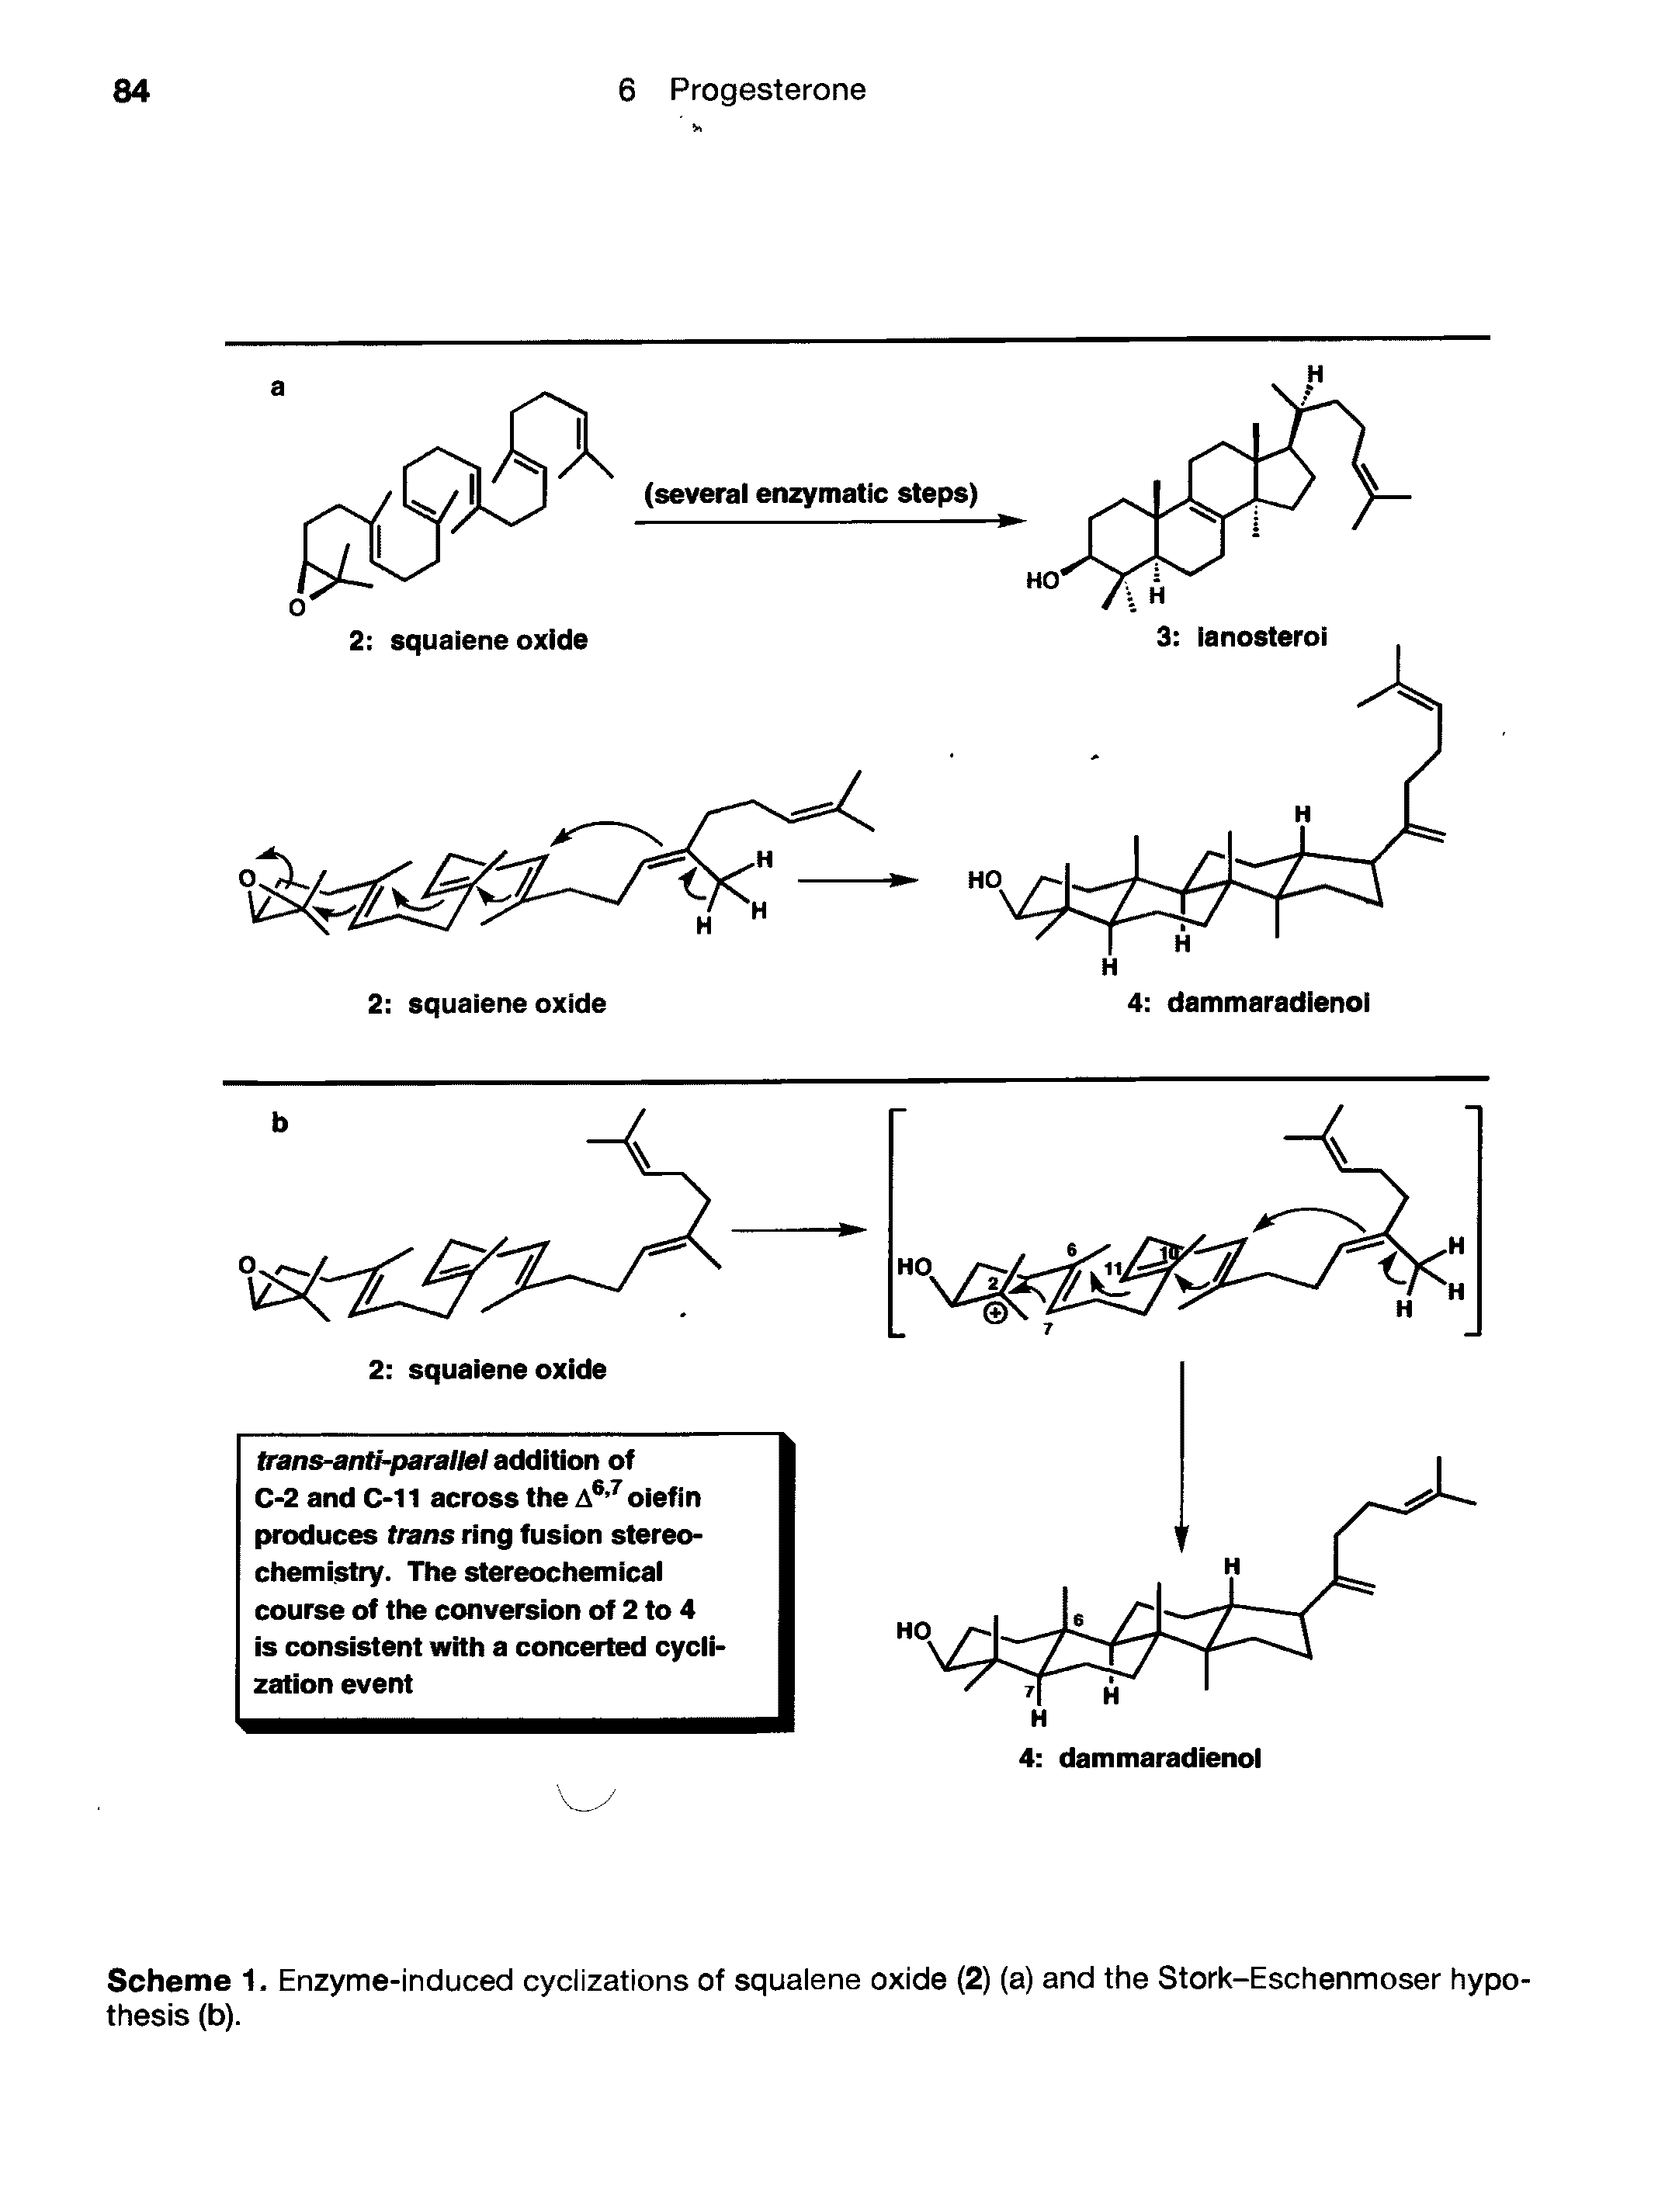 Scheme 1, Enzyme-induced cyclizations of squalene oxide (2) (a) and the Stork-Eschenmoser hypothesis (b).